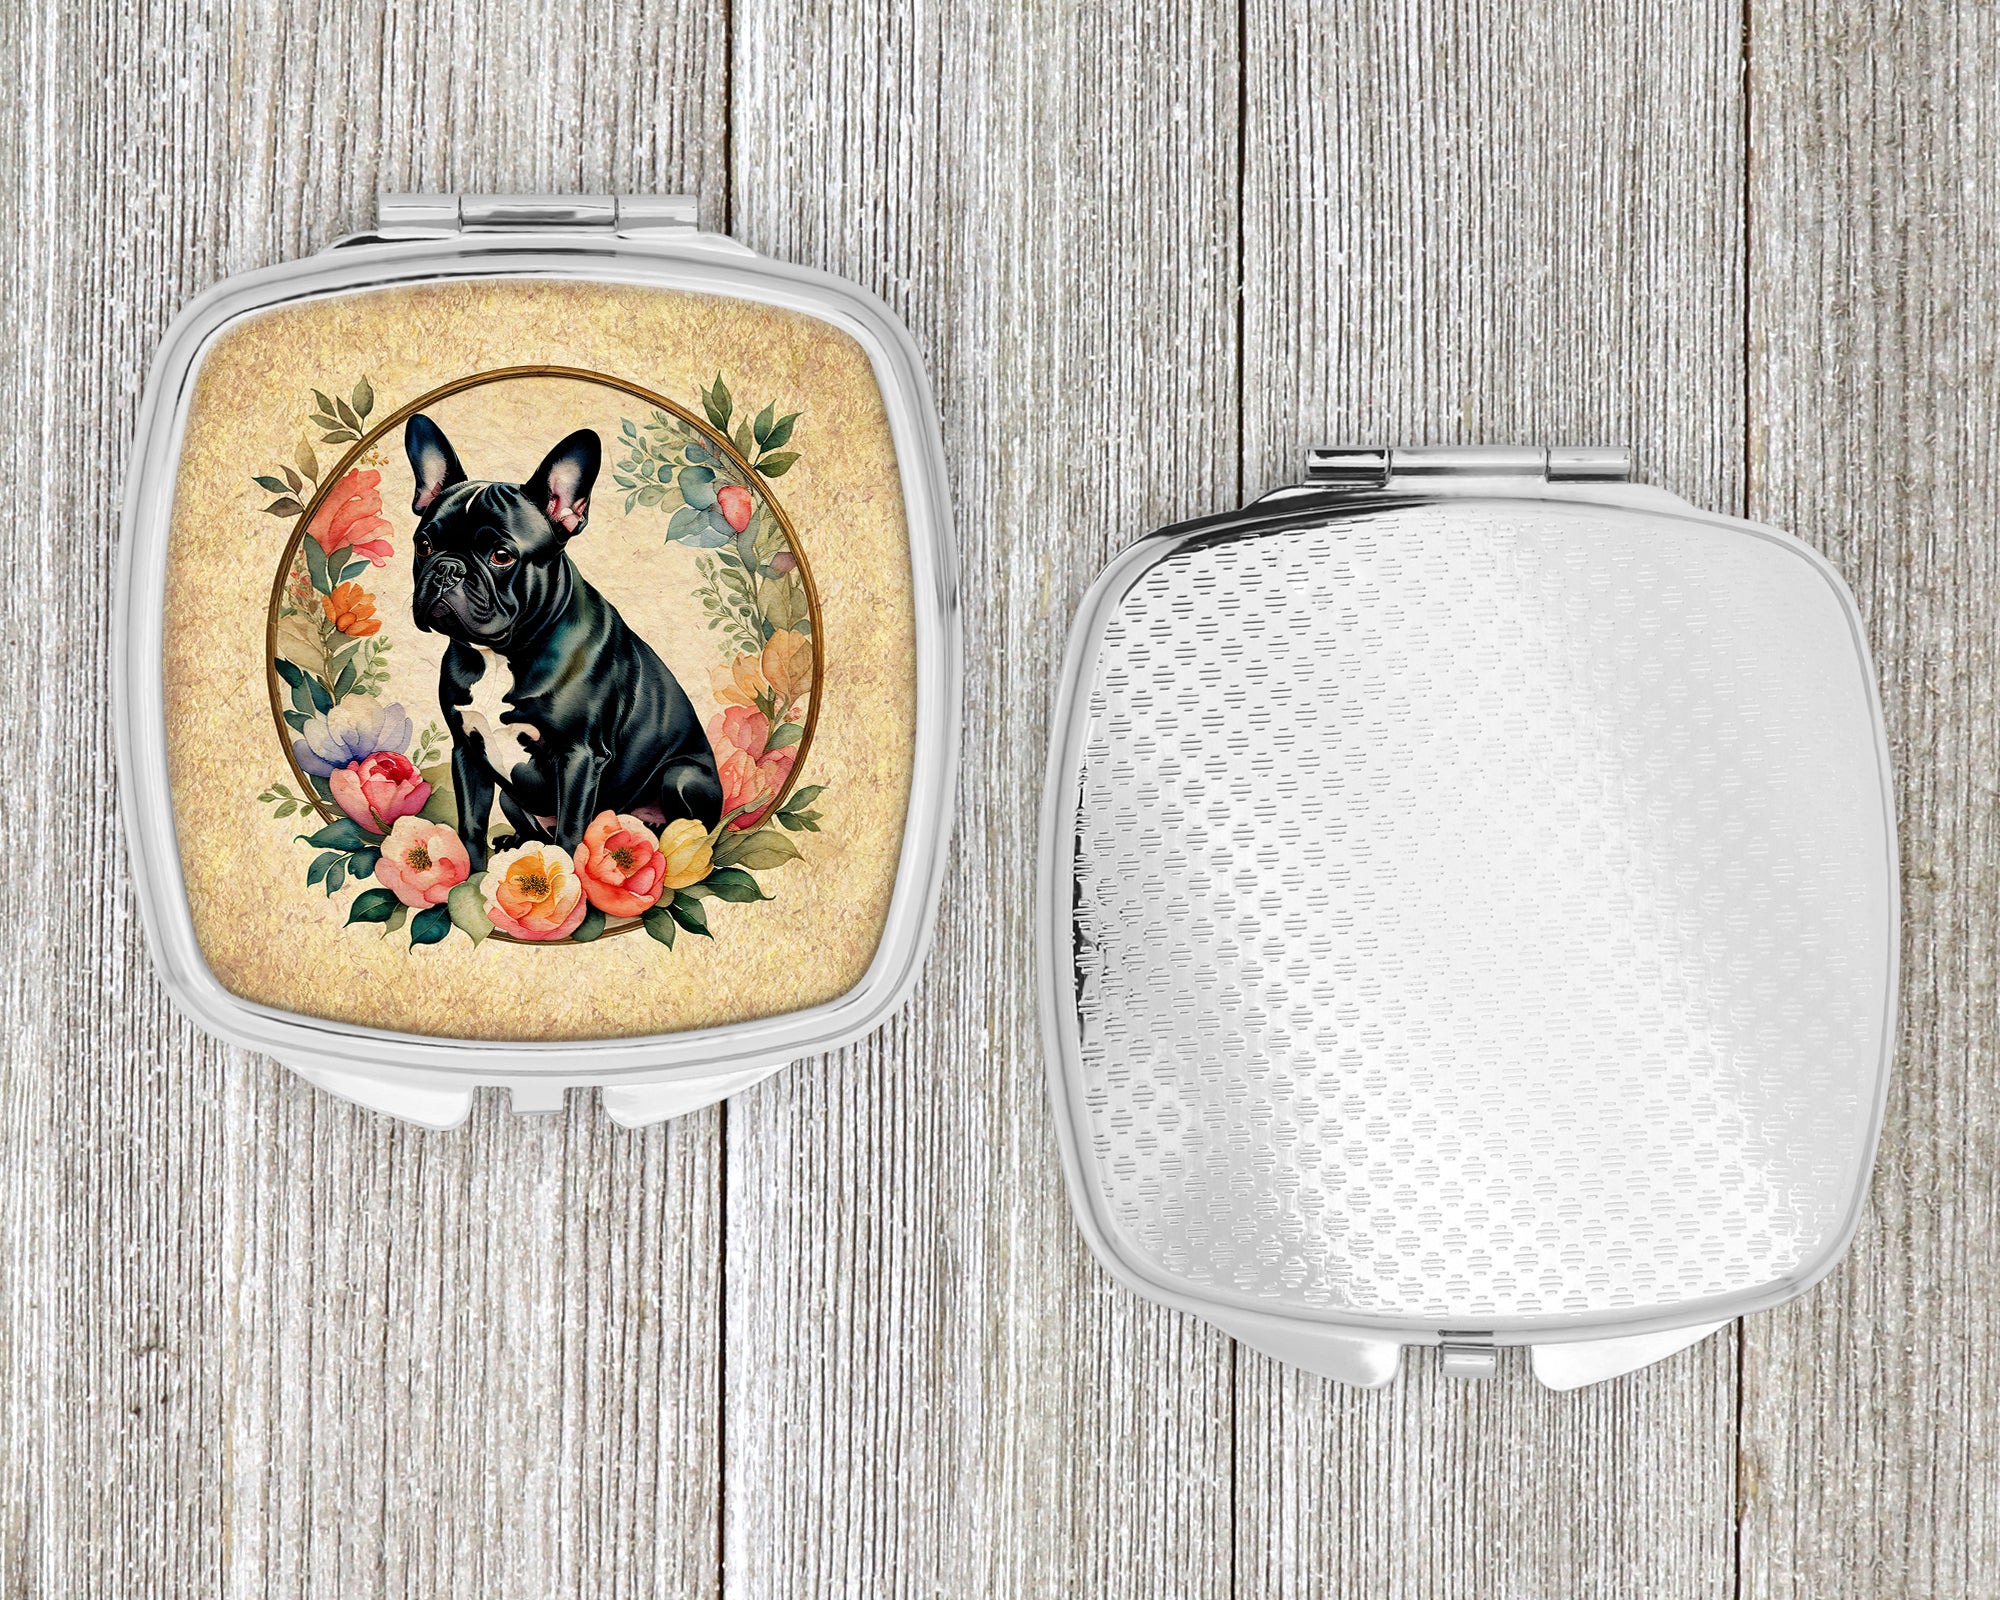 Black French Bulldog and Flowers Compact Mirror